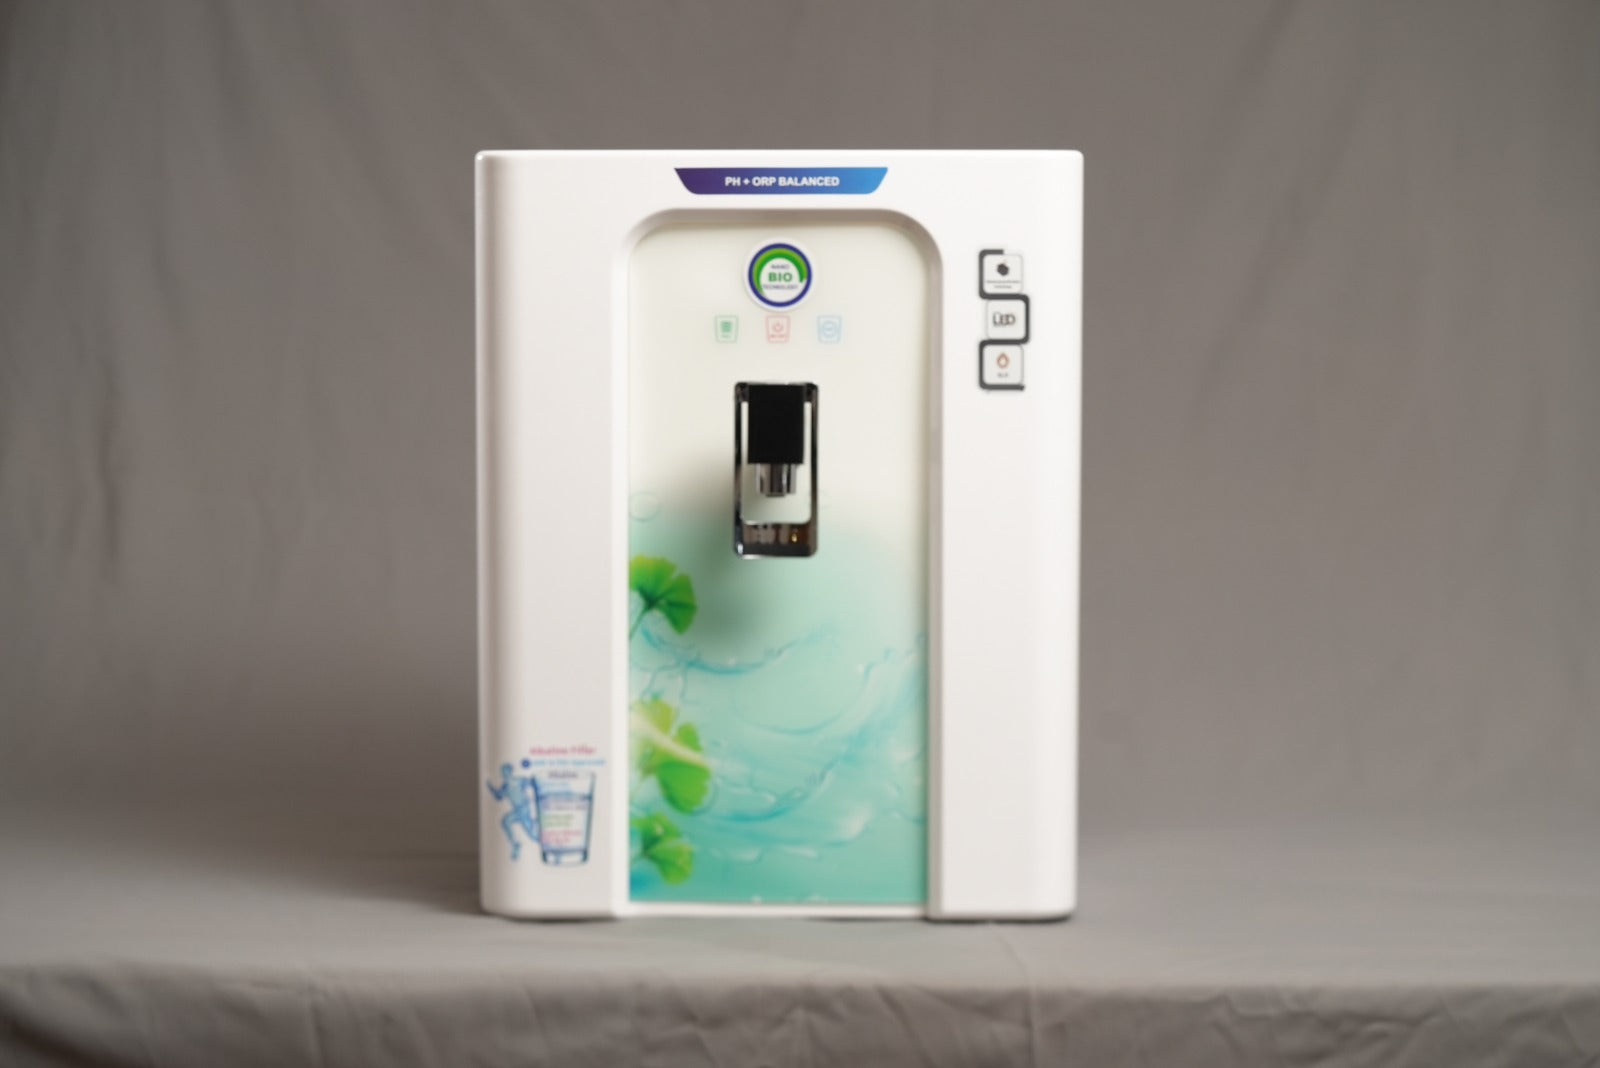 Heartyculture's Smart white Luxury - Wall Mounted Antioxidant Alkaline Water Filter